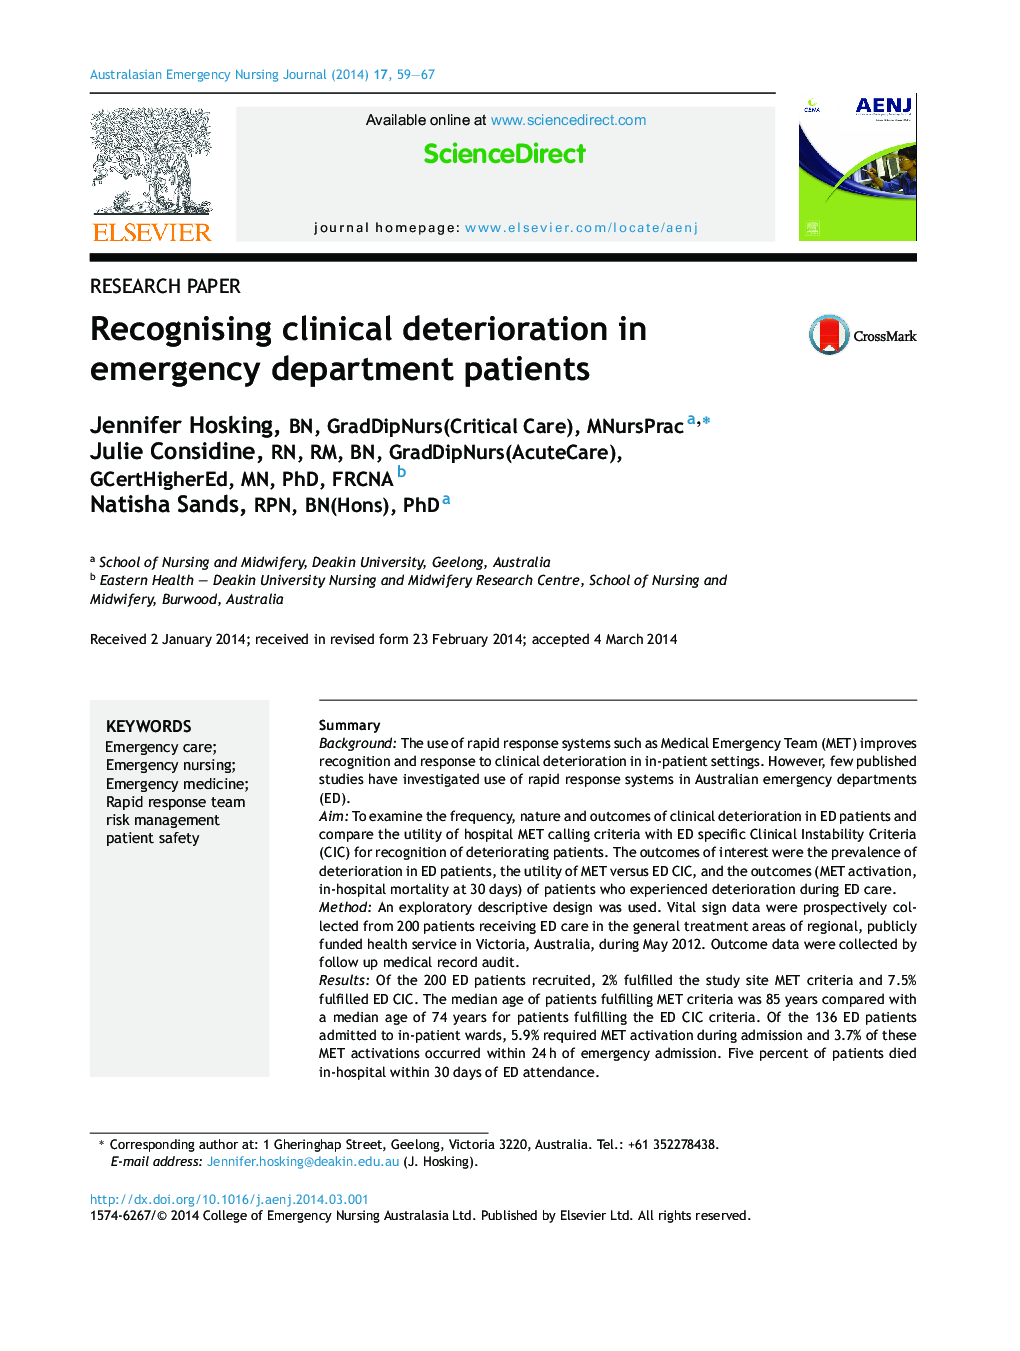 Recognising clinical deterioration in emergency department patients